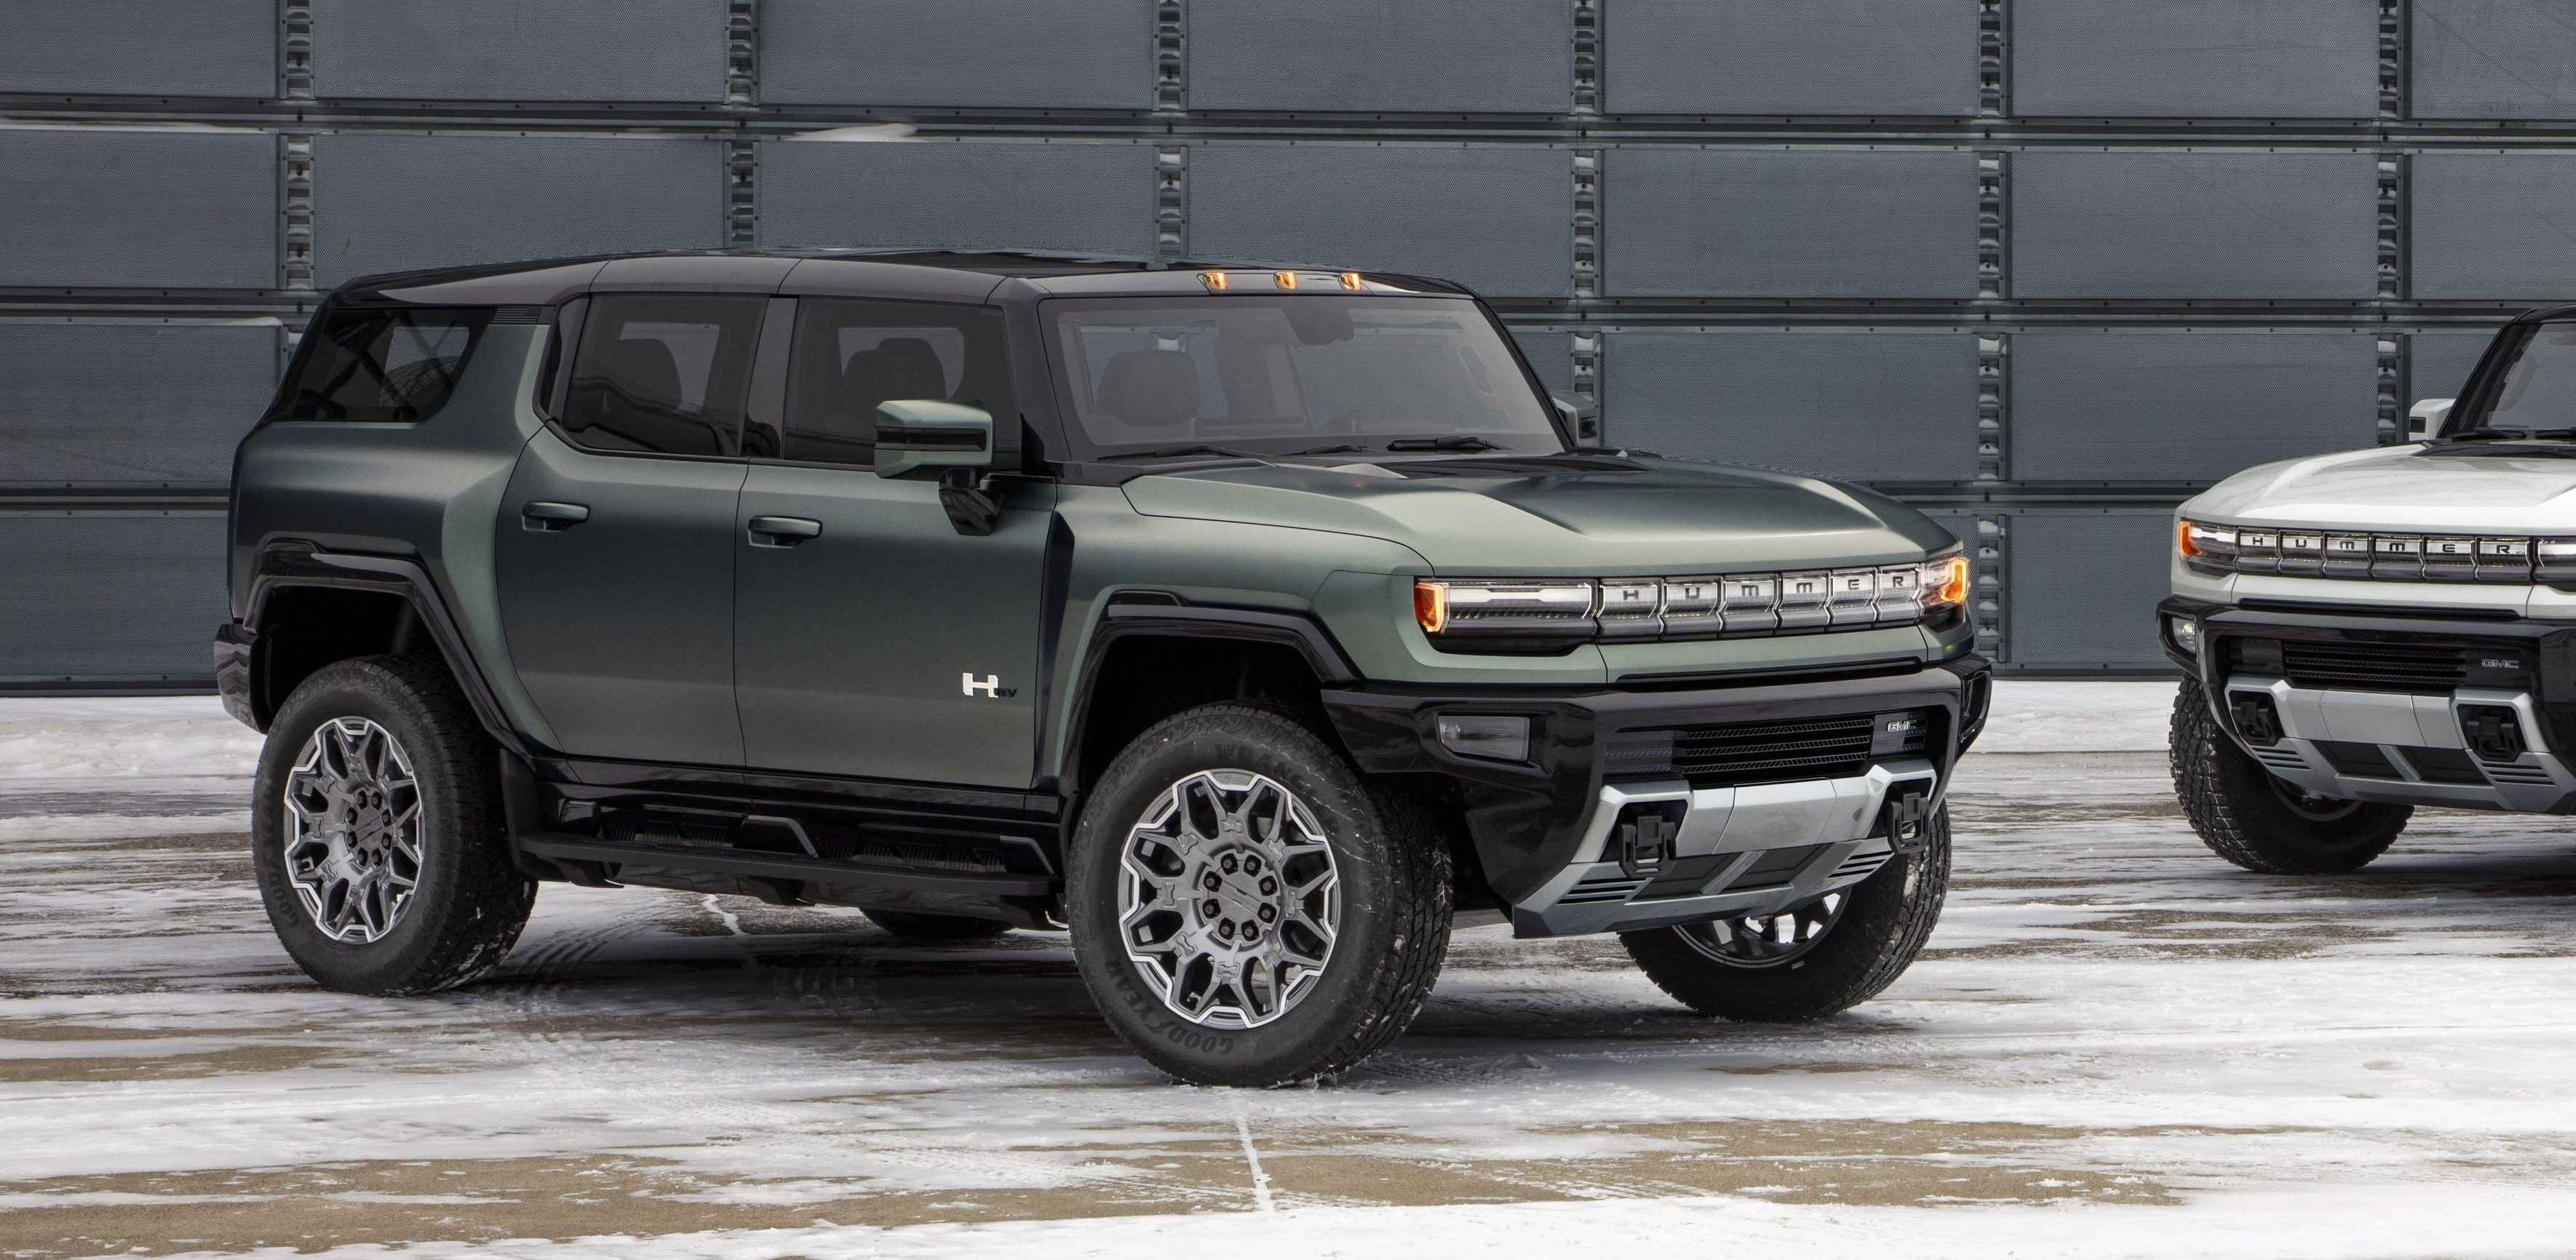 Two GMC Hummer EVs